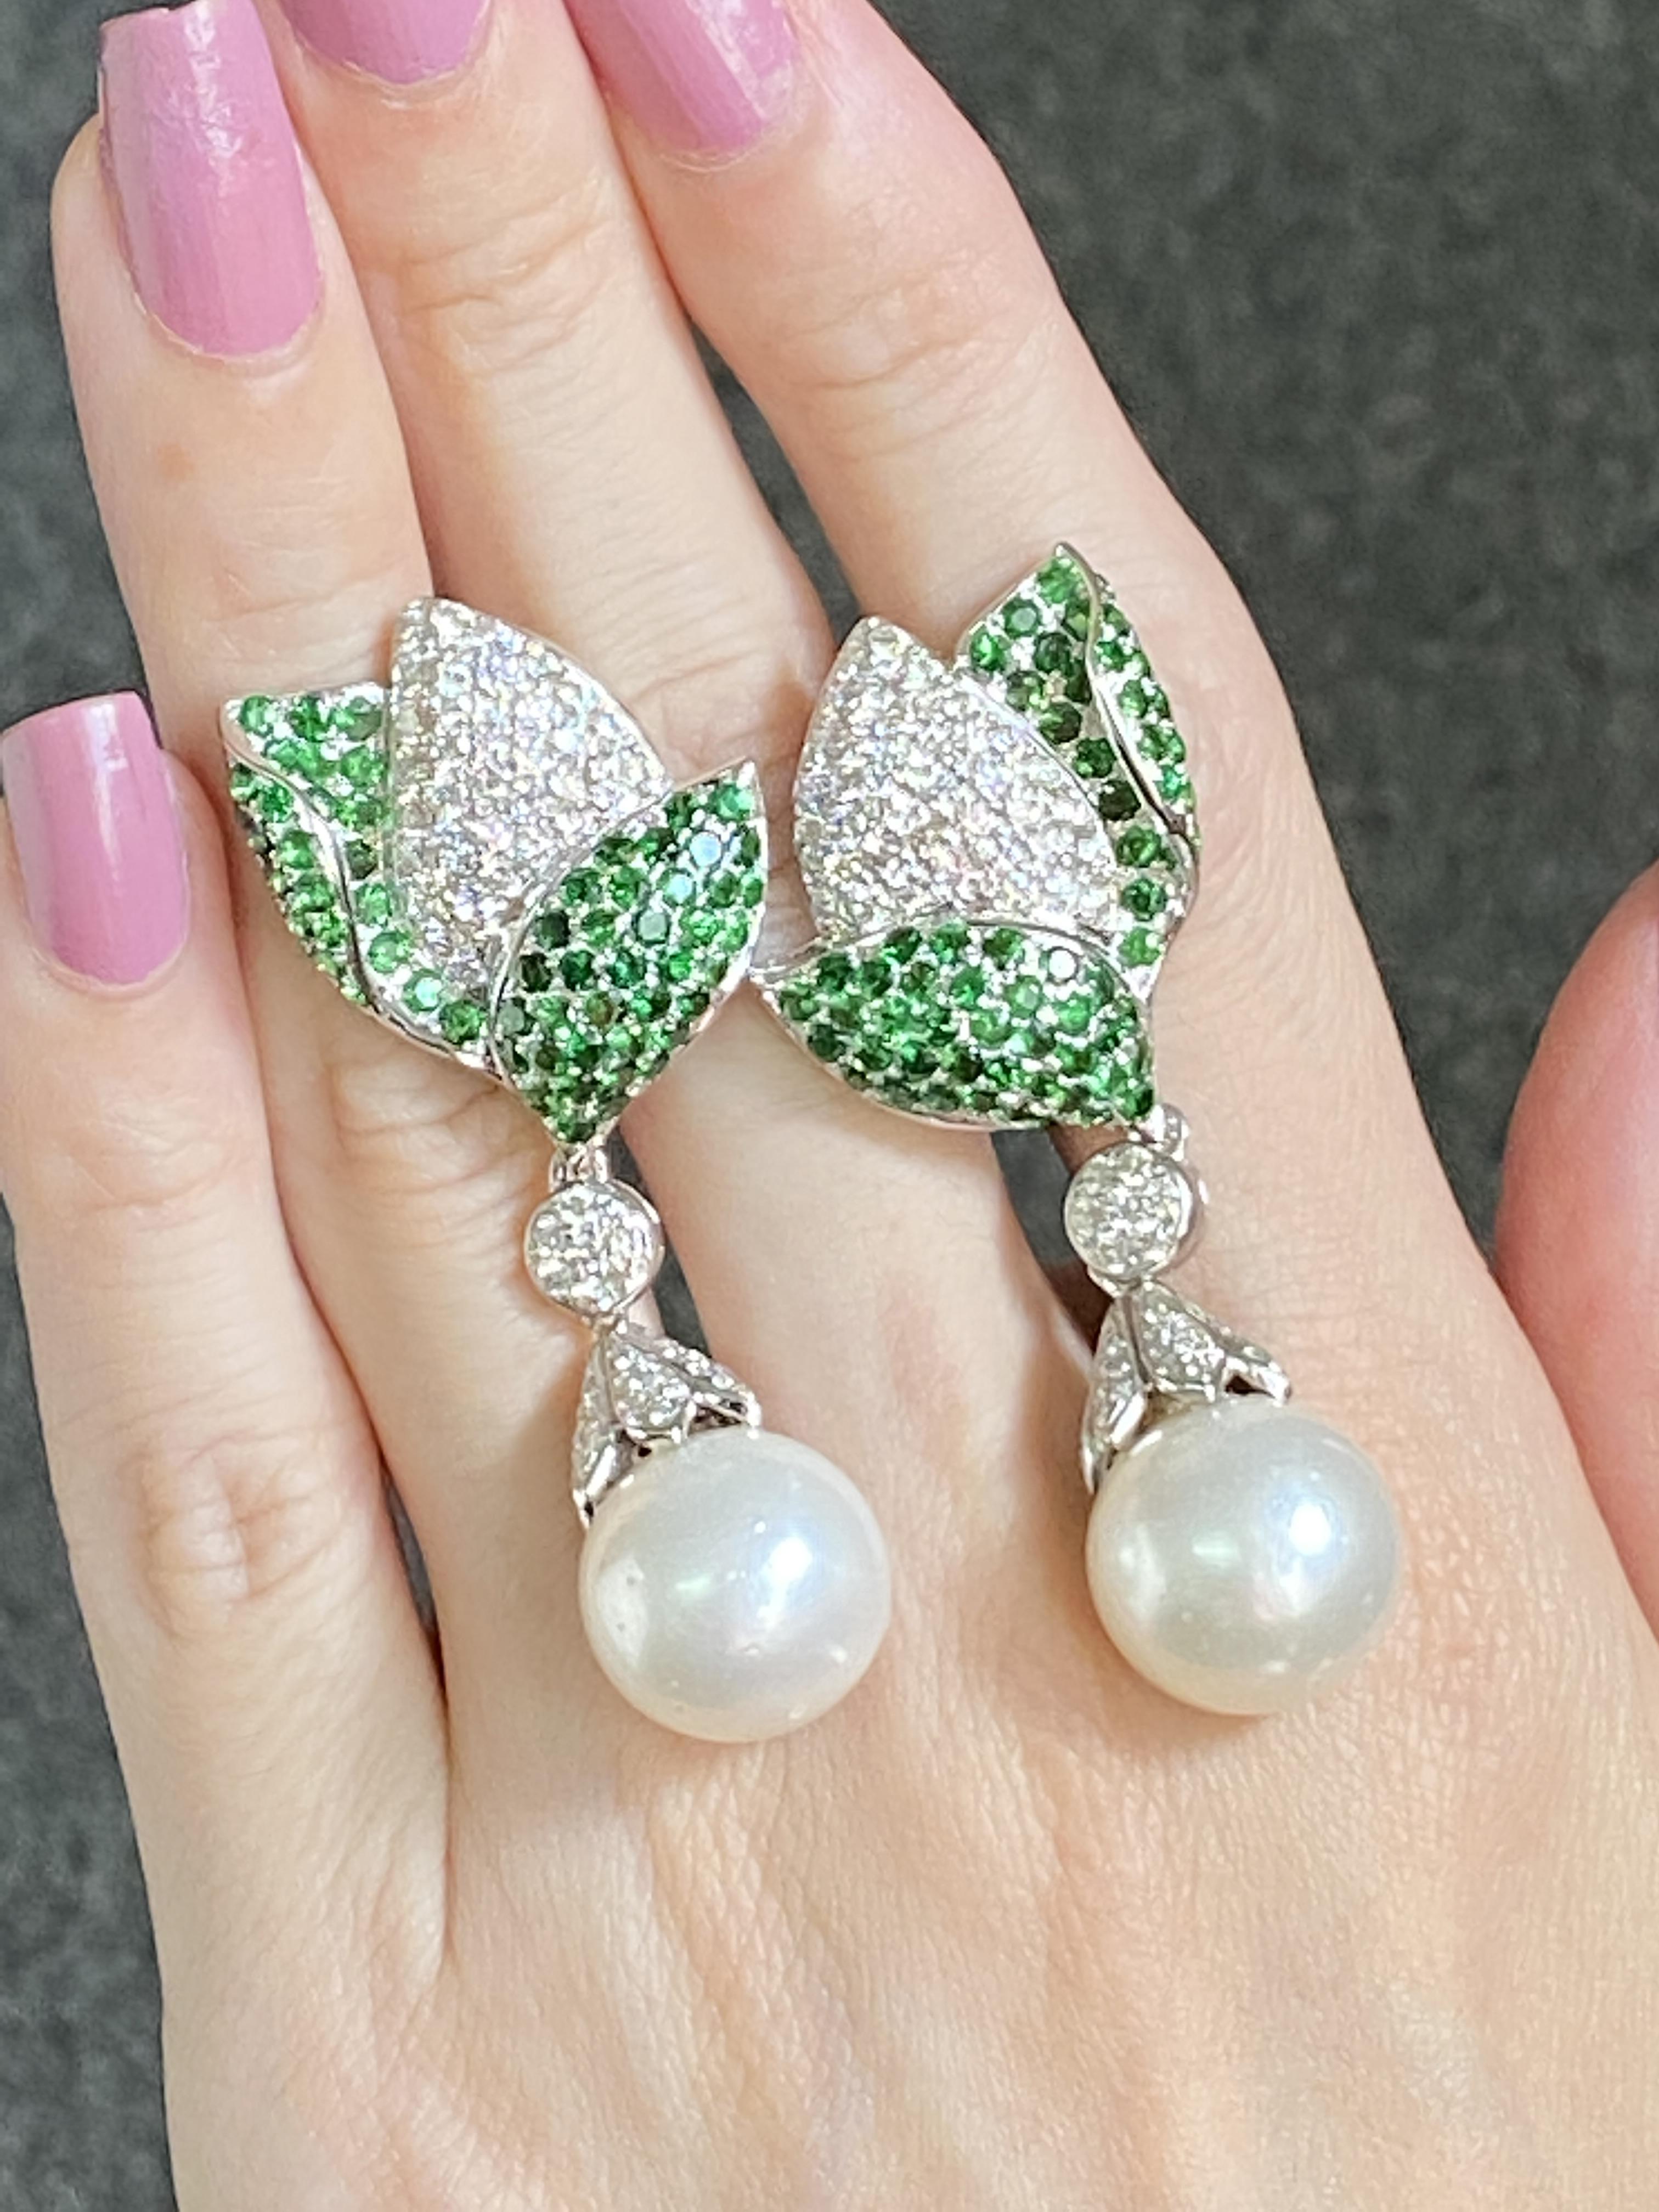 Make a statement with this beautiful pair of earrings! South Sea pearls dangling from 18K White Gold petals, studded with White Diamond and Tsavorite. The earrings are currently 2 inches long, and come with a push-pull backing.
Please message us for